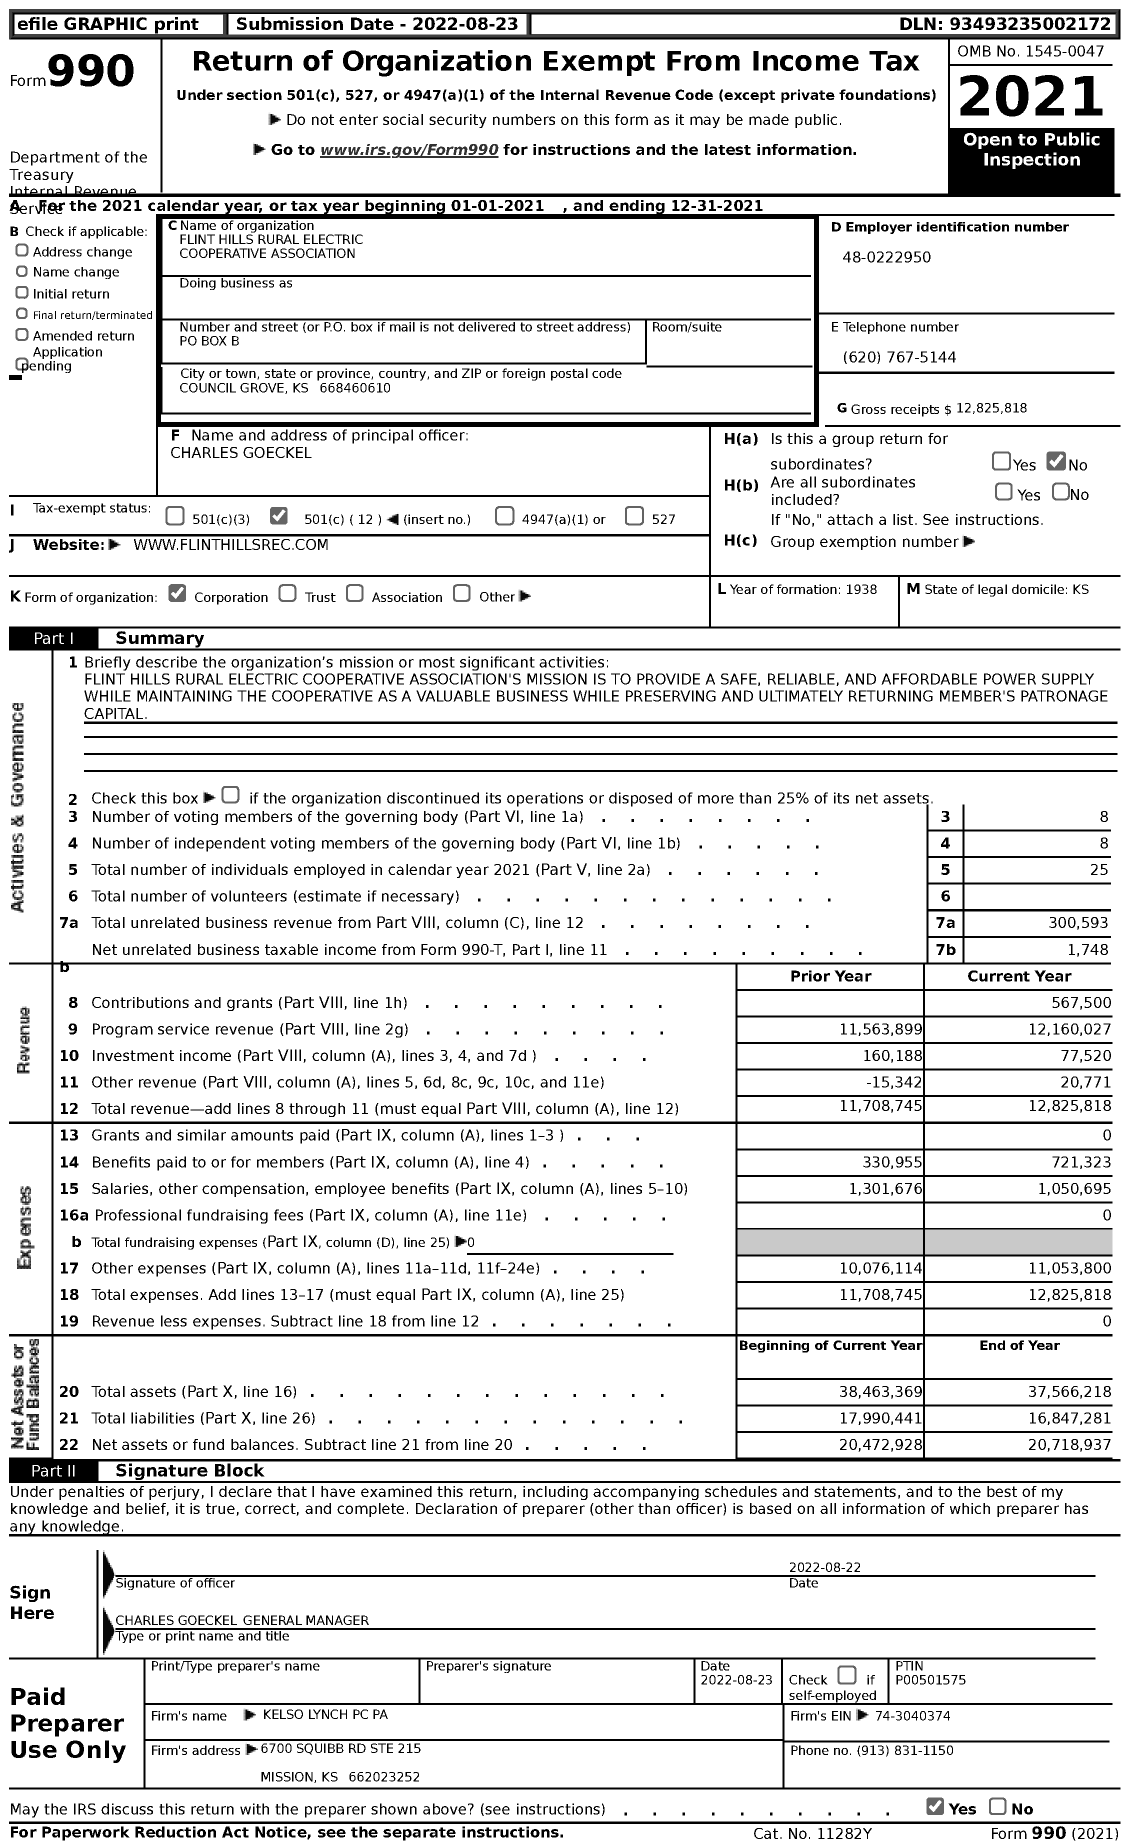 Image of first page of 2021 Form 990 for Flint Hills Rural Electric Cooperative Association